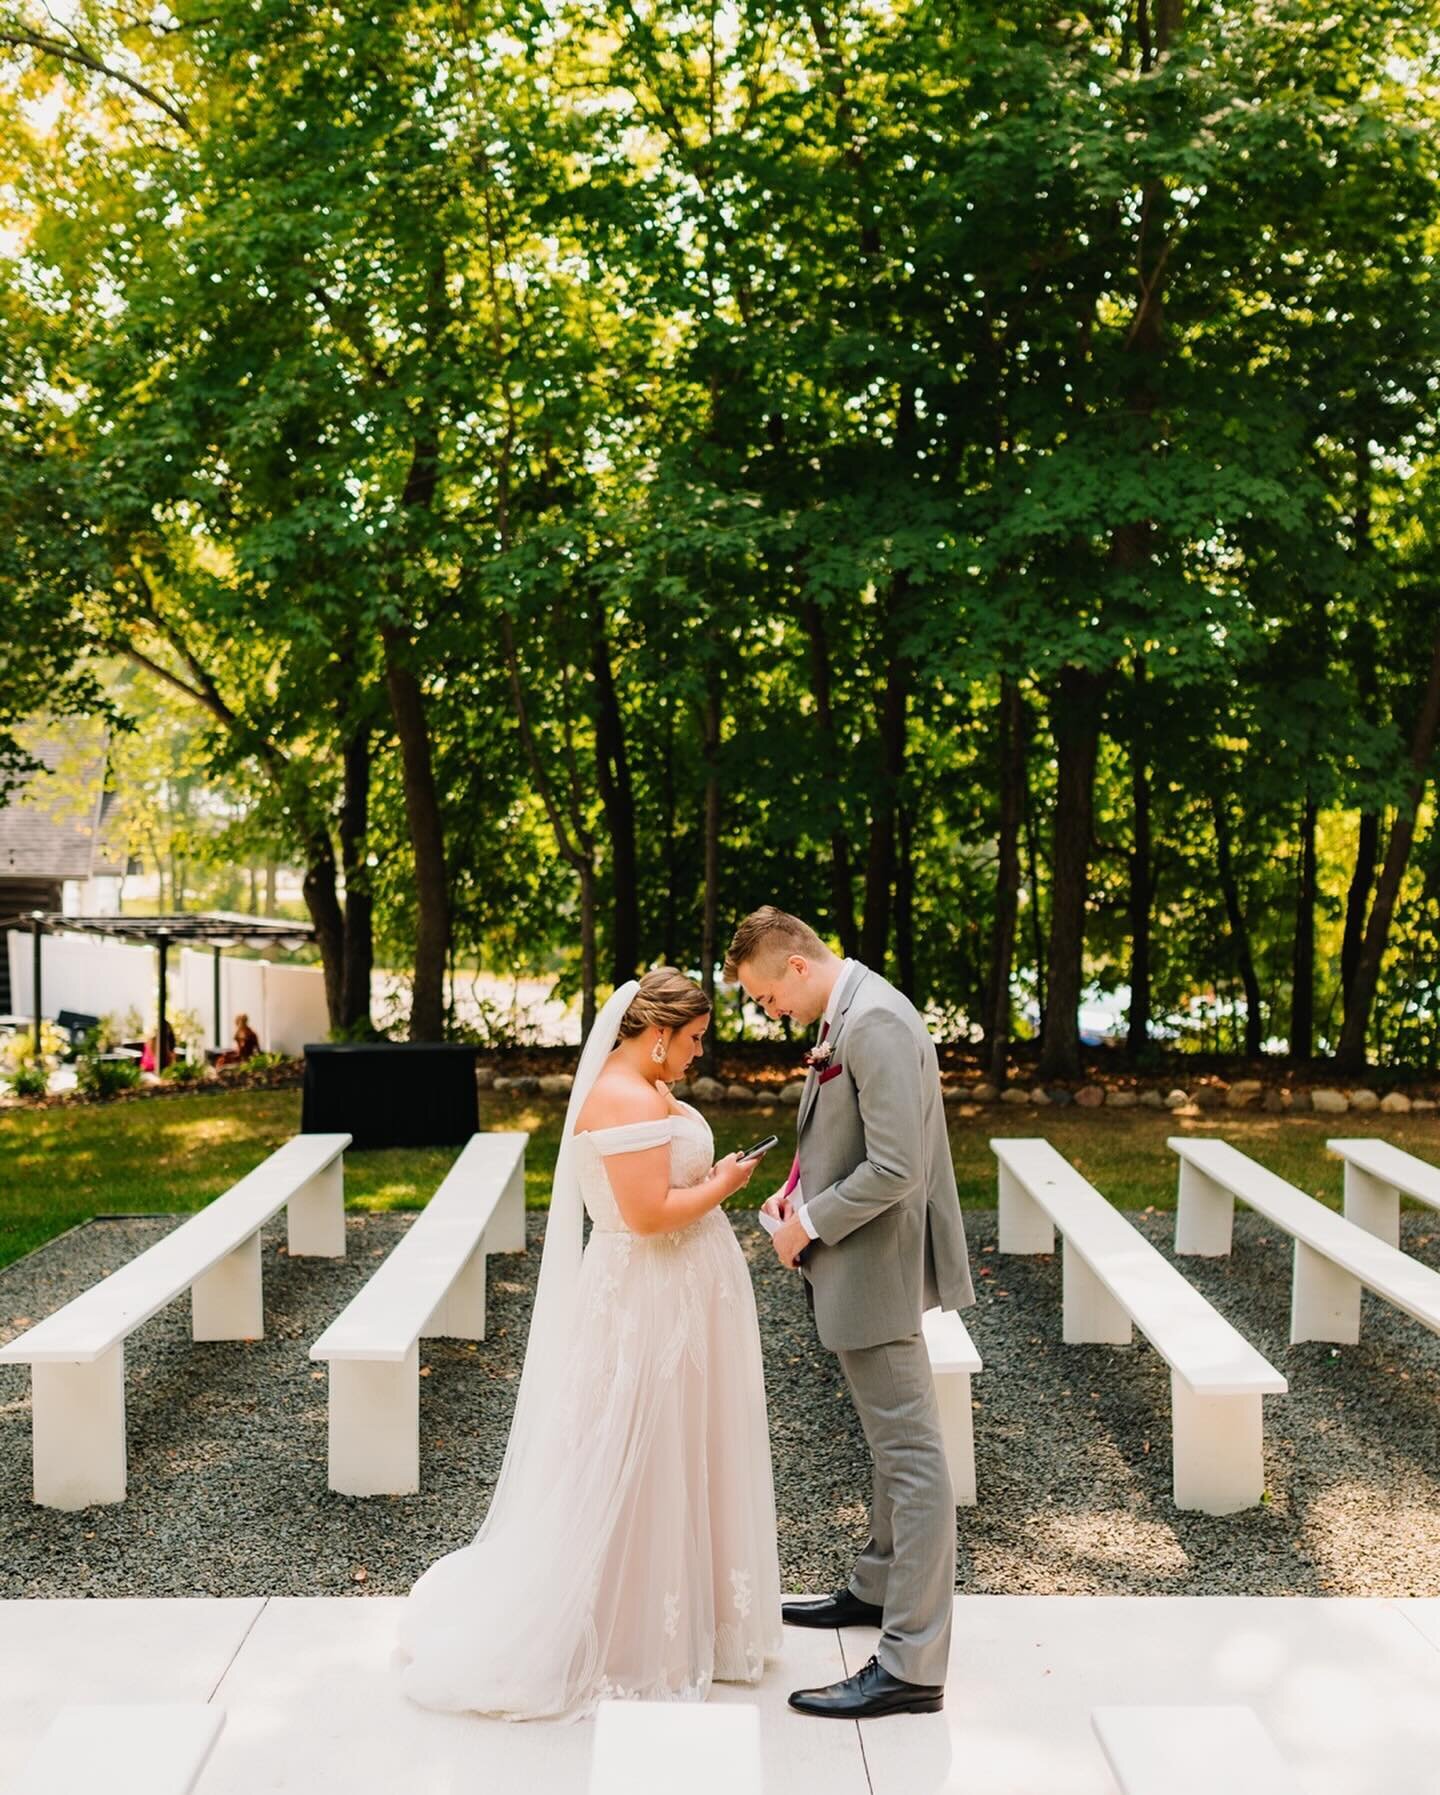 Kayla &amp; Andrew chose to write their own vows and share them privately after their first look 🥹🫶🏻 this sweet moment let them take their time and feel allllll their emotions, and they still said the traditional vows at the ceremony! With two pho